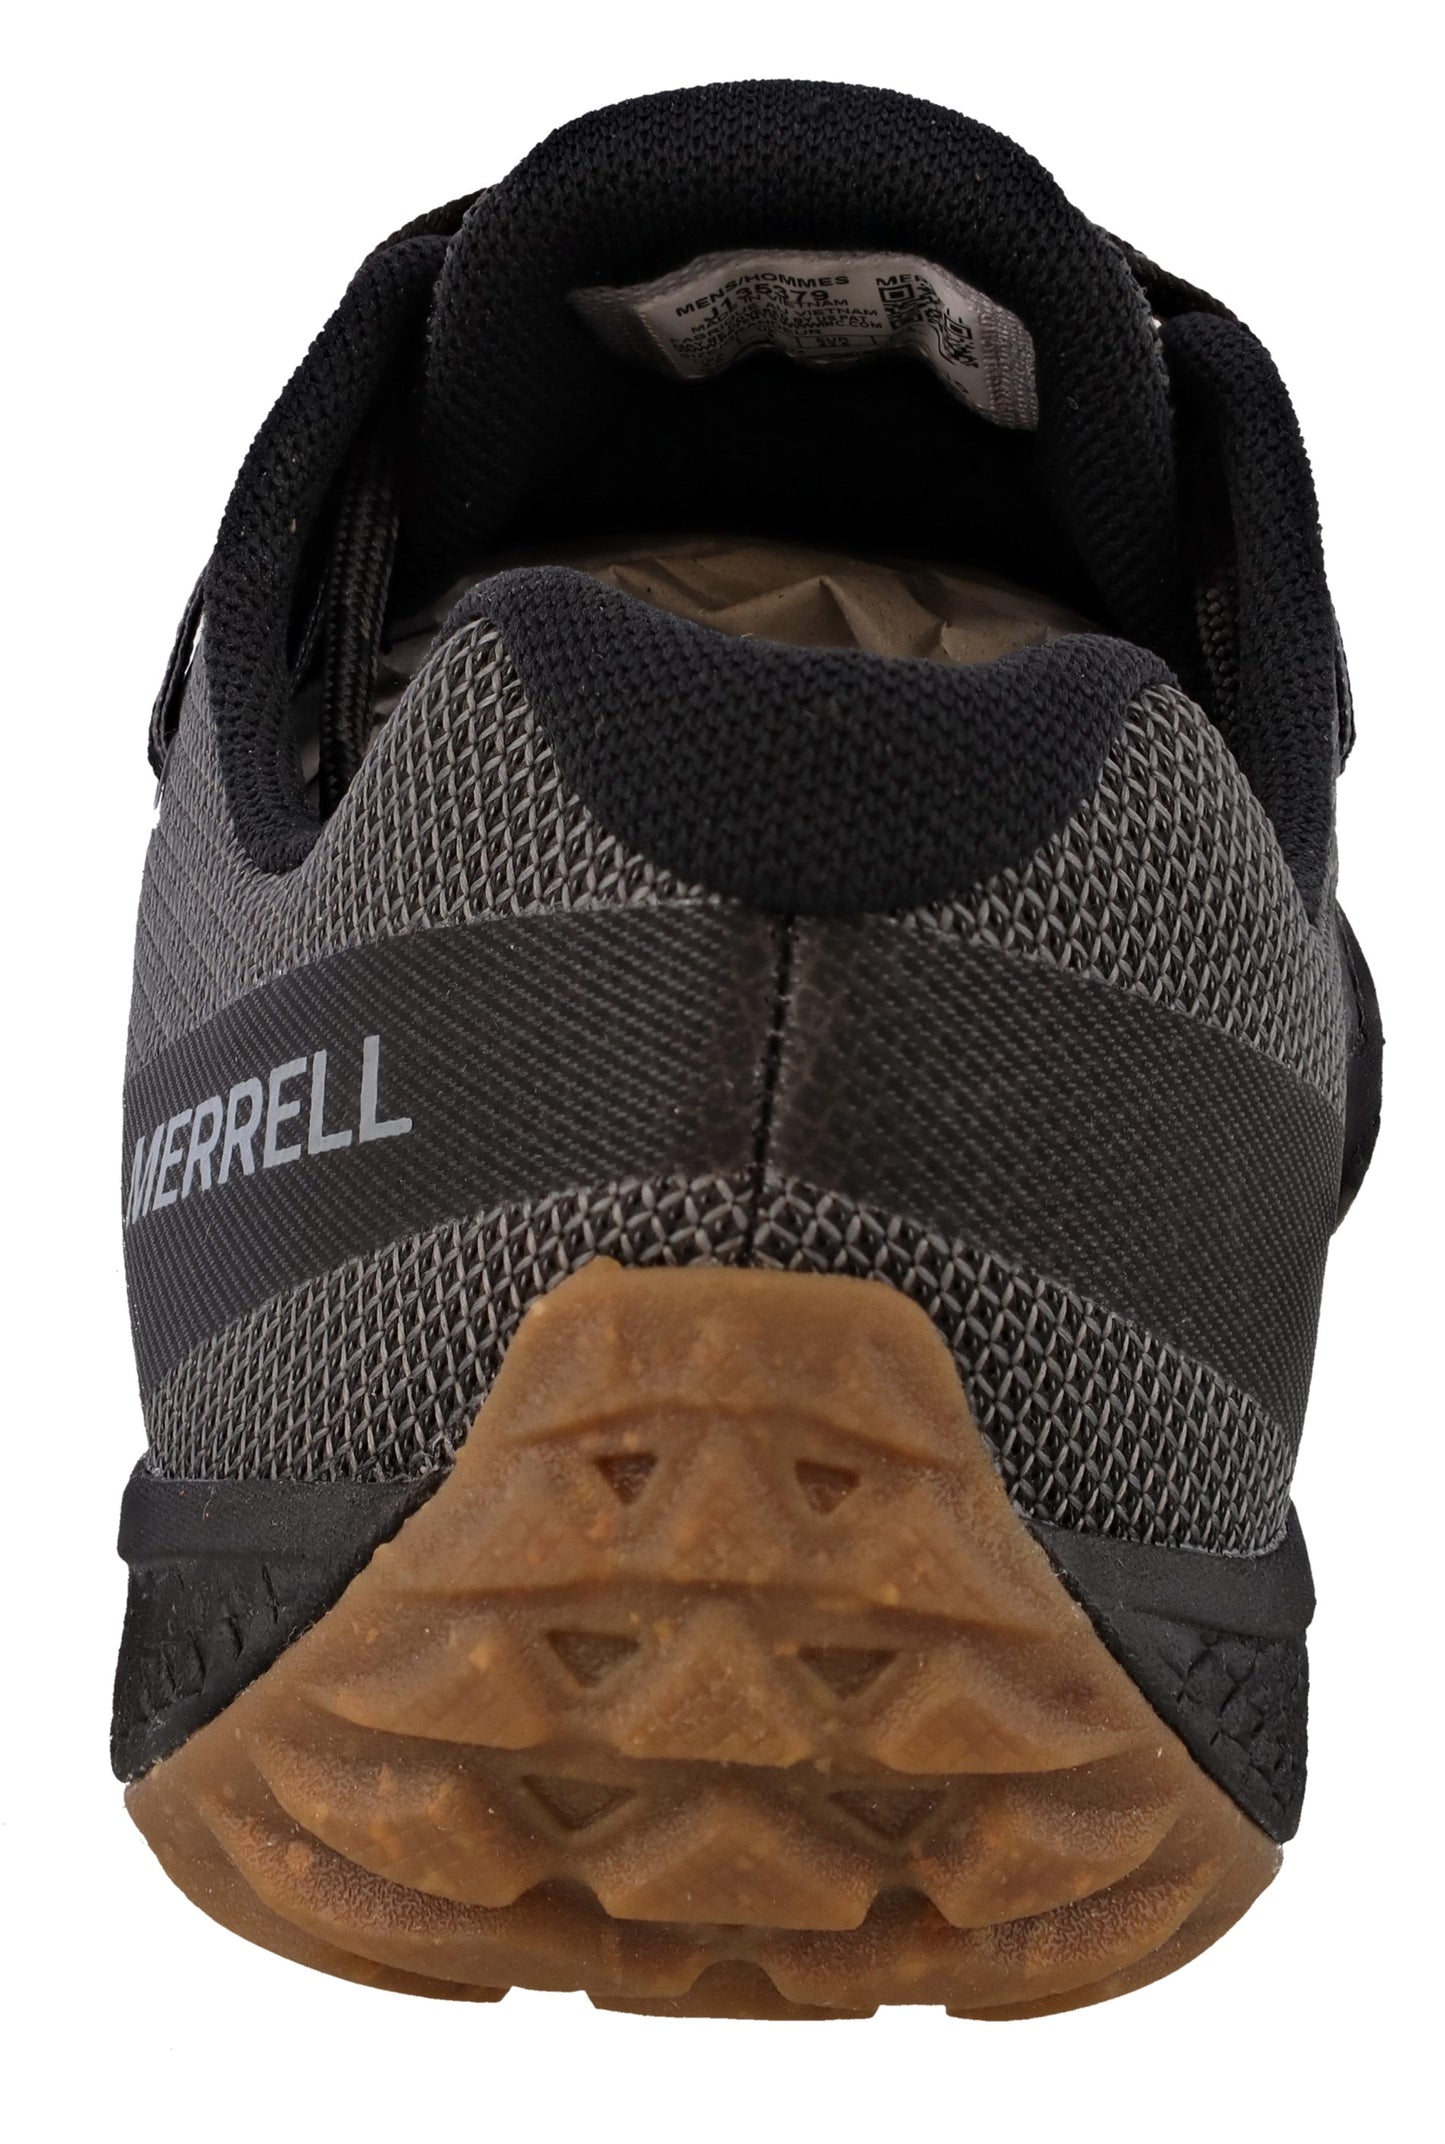 Merrell Barefoot Road Glove  Best hiking shoes, Minimalist shoes, Merrell  shoes mens